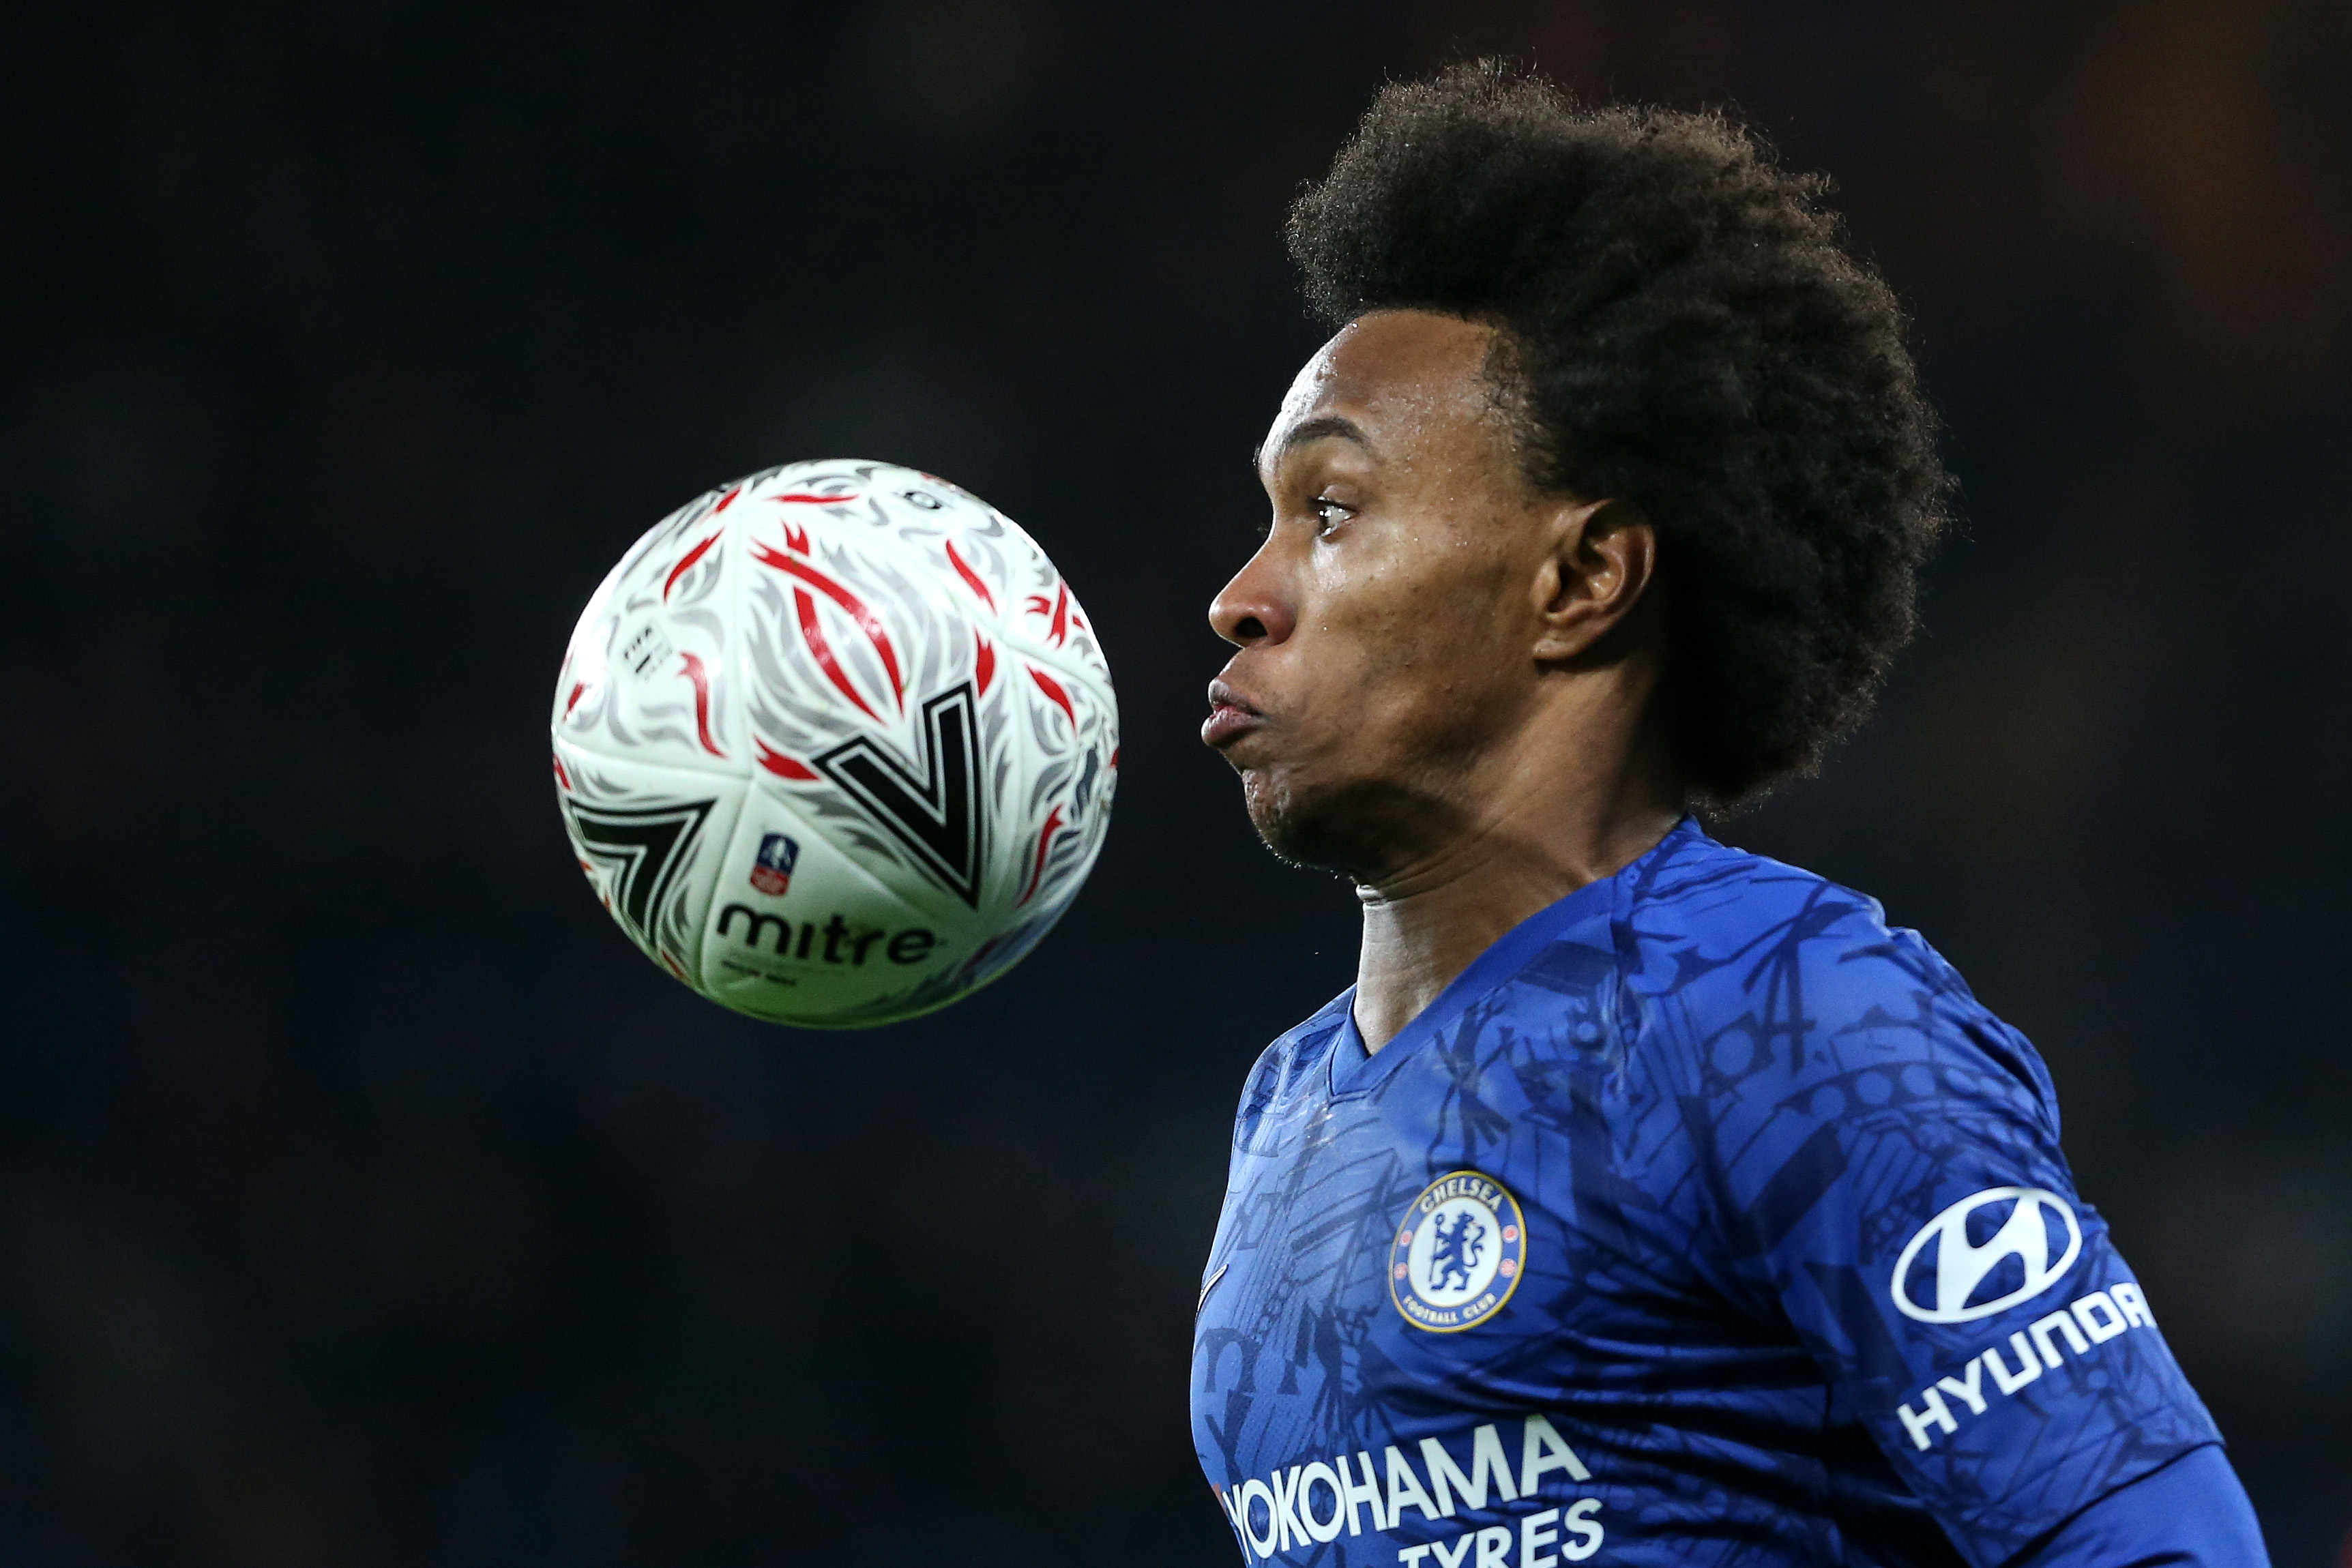 Arsenal transfer rumour round-up: Willian agrees deal as Gunners transfer chiefs put pressure on Aubameyang